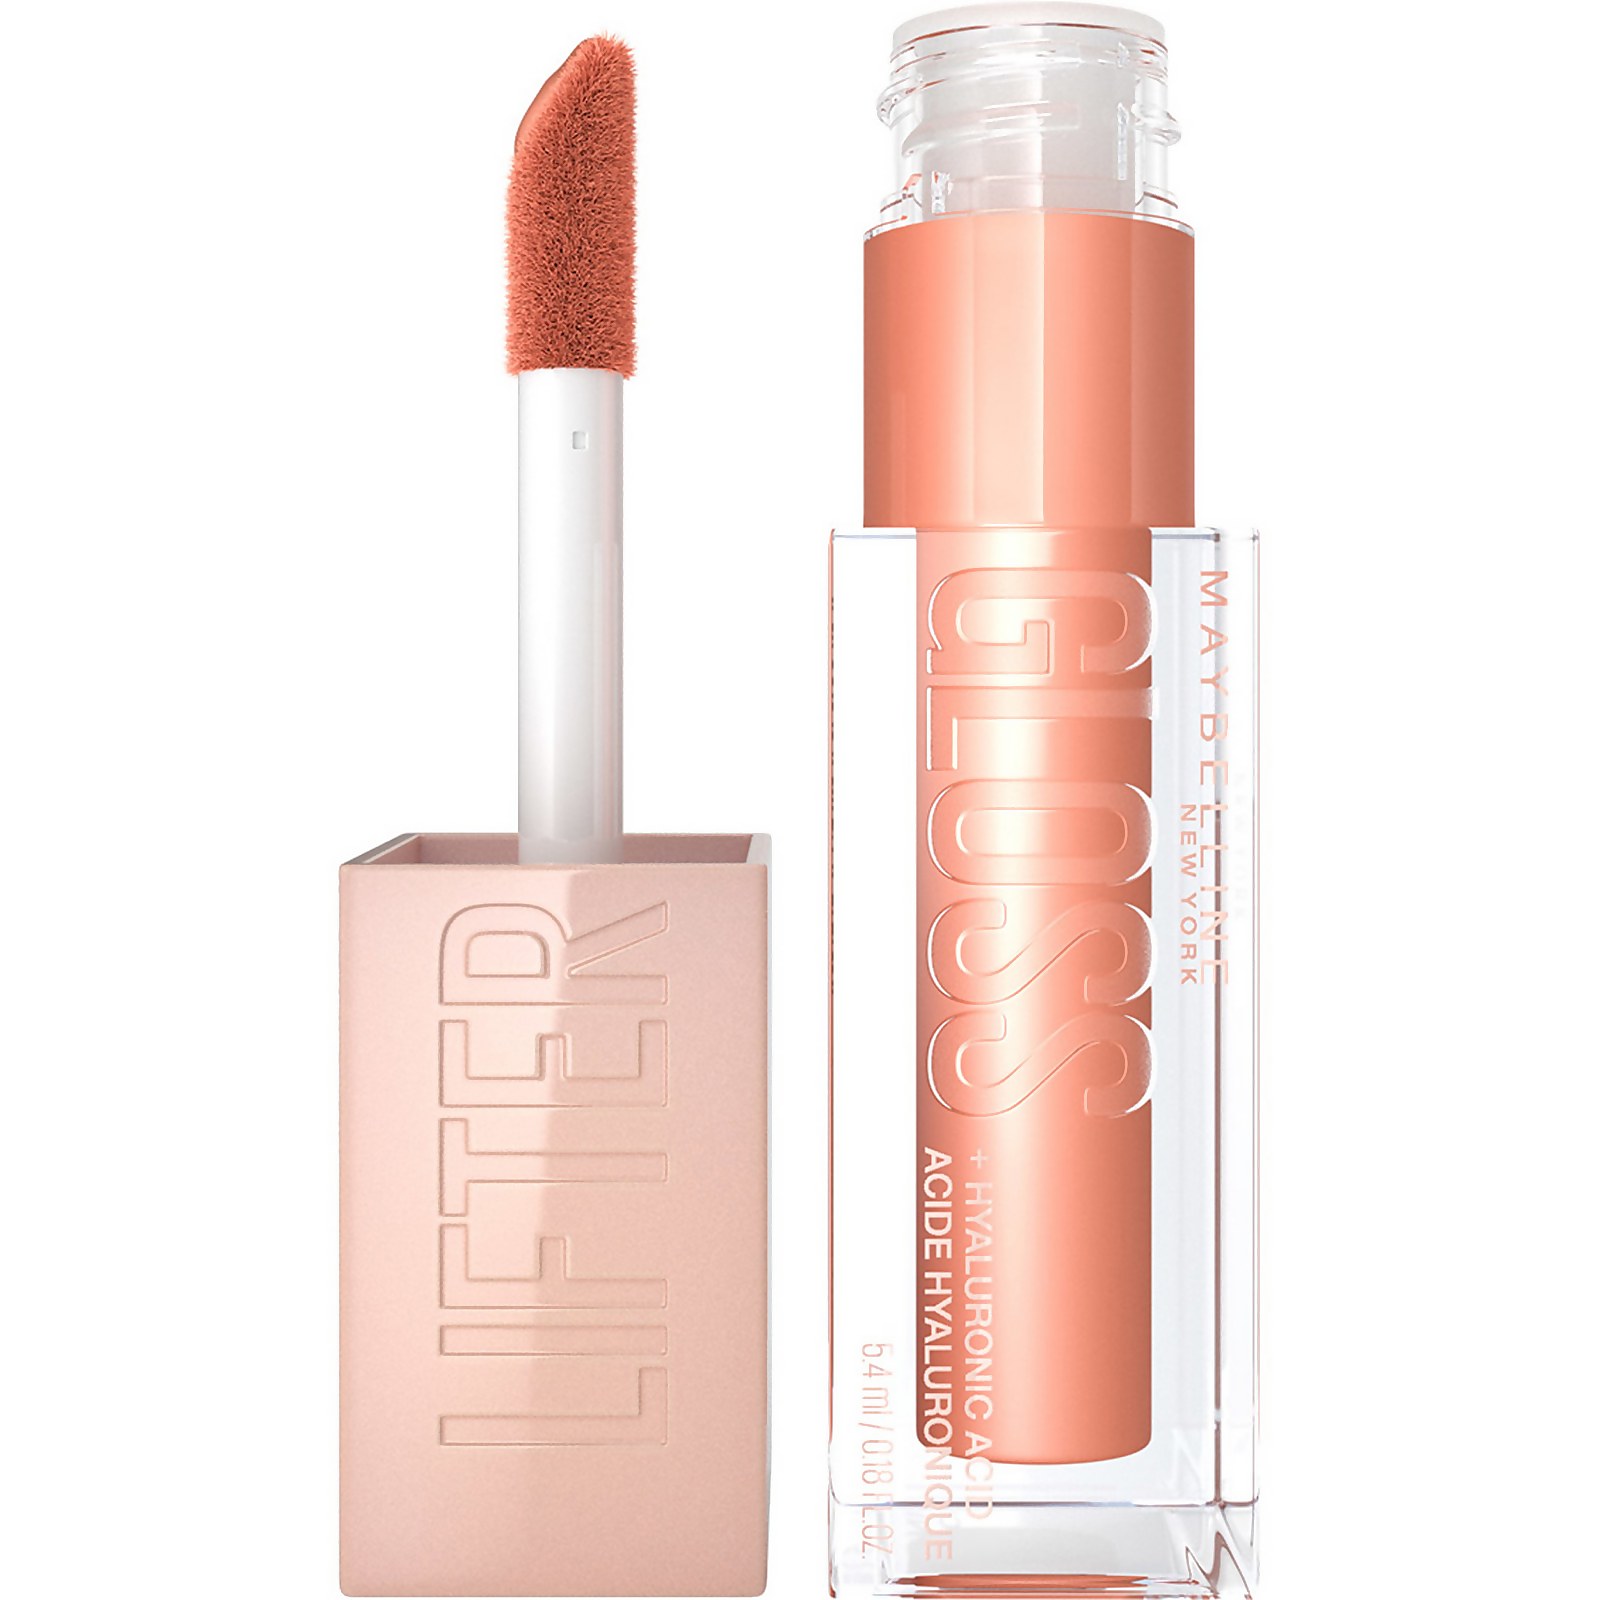 Image of Maybelline Lifter Gloss Hydrating Lip Gloss with Hyaluronic Acid 5g (Various Shades) - 007 Amber